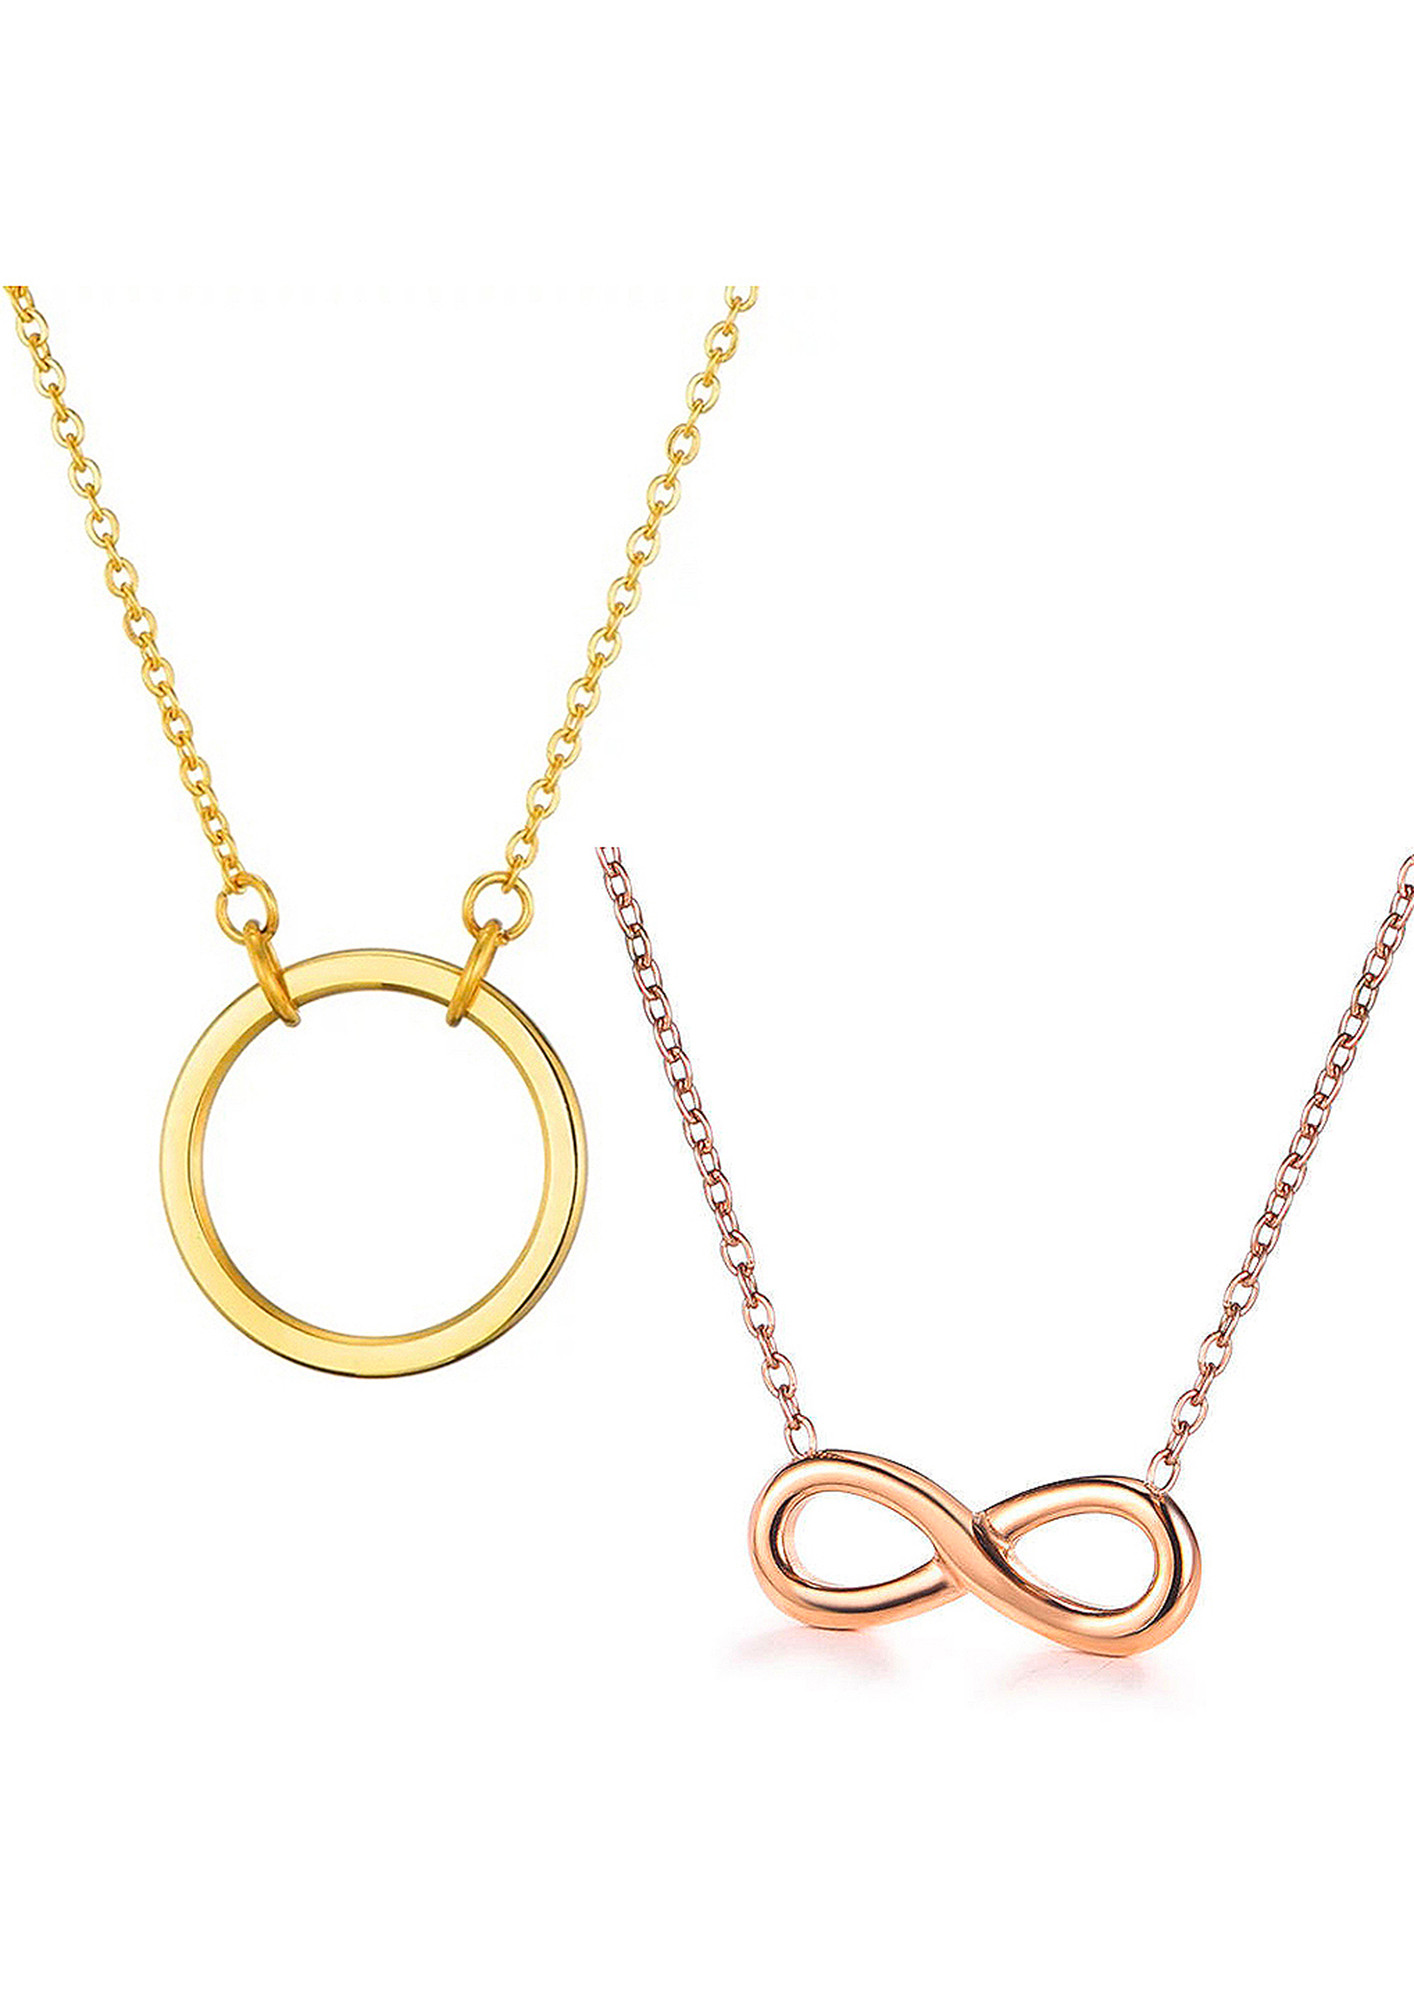 Rose Gold & Double Circle Necklace with Simulated Diamonds